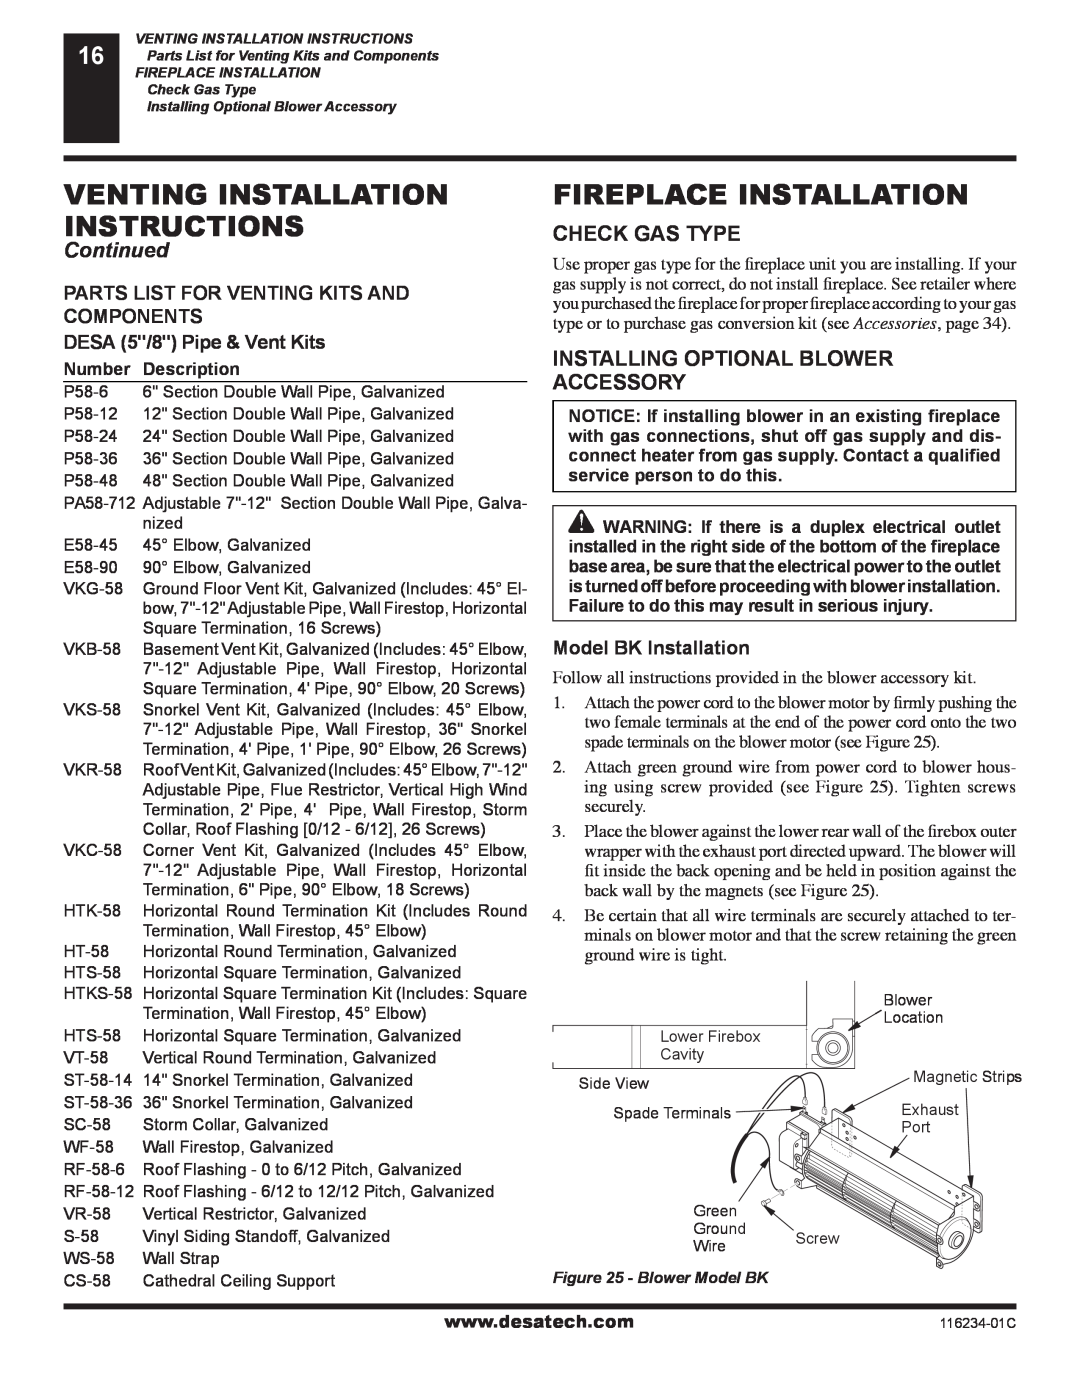 Desa (V)TC36PE SERIES Venting Installation, Instructions, Continued, Parts List For Venting Kits And, Components 